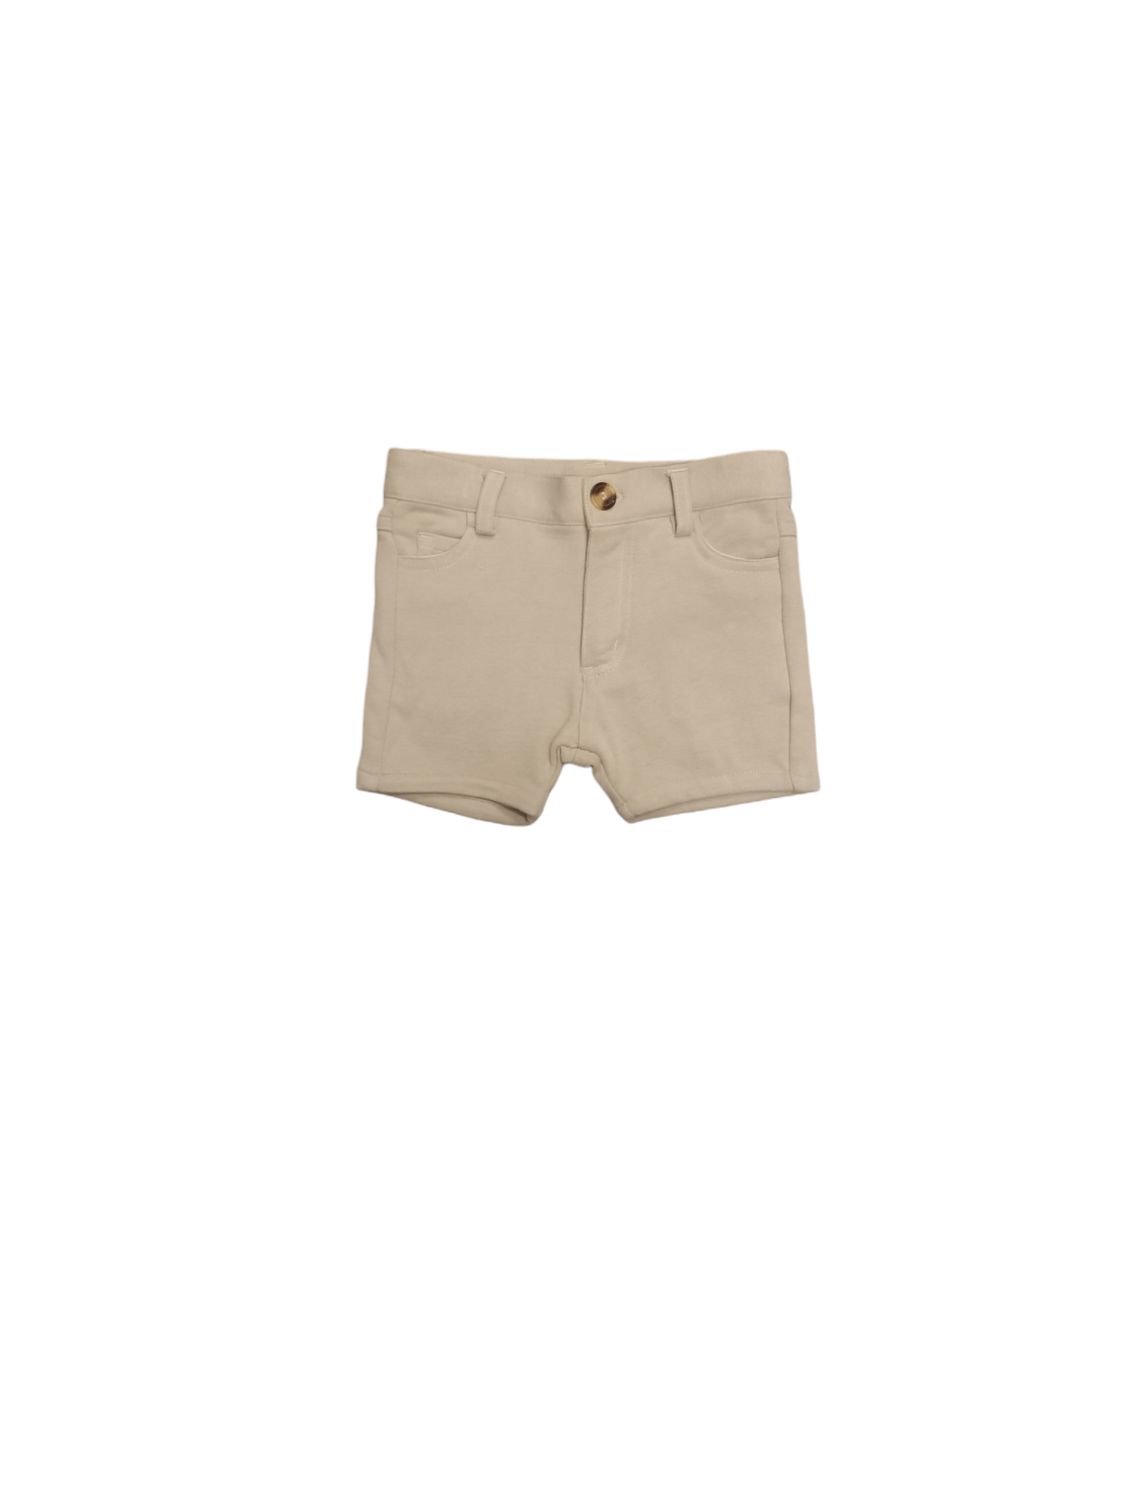 Crew Kids Knit Short - Taupe